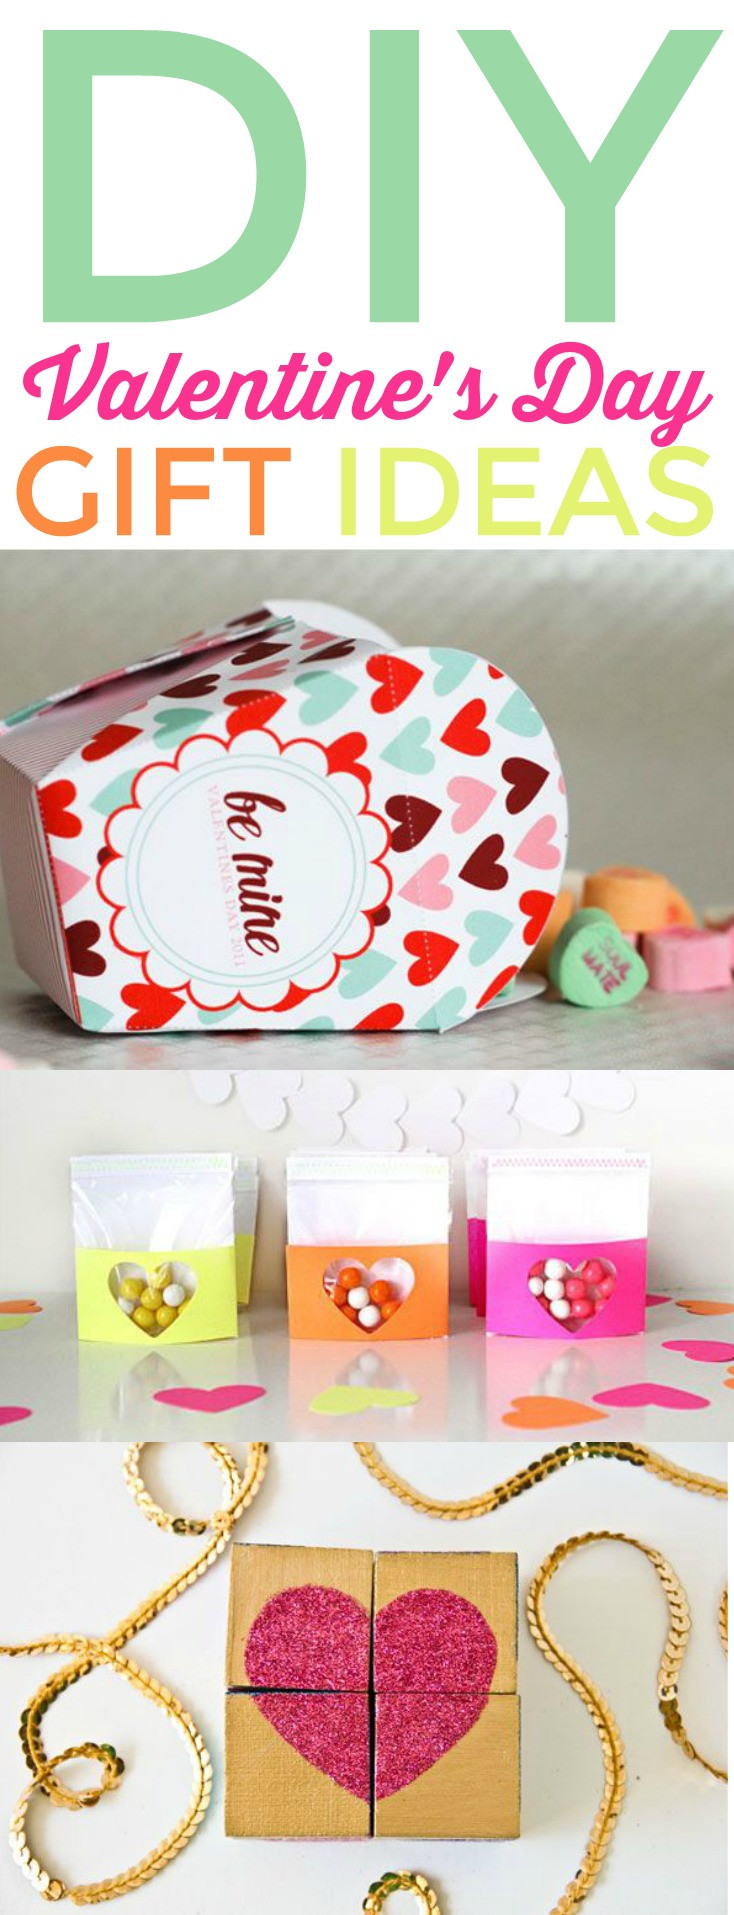 Valentine Day Handmade Gift Ideas
 DIY Valentines Day Gift Ideas A Little Craft In Your Day